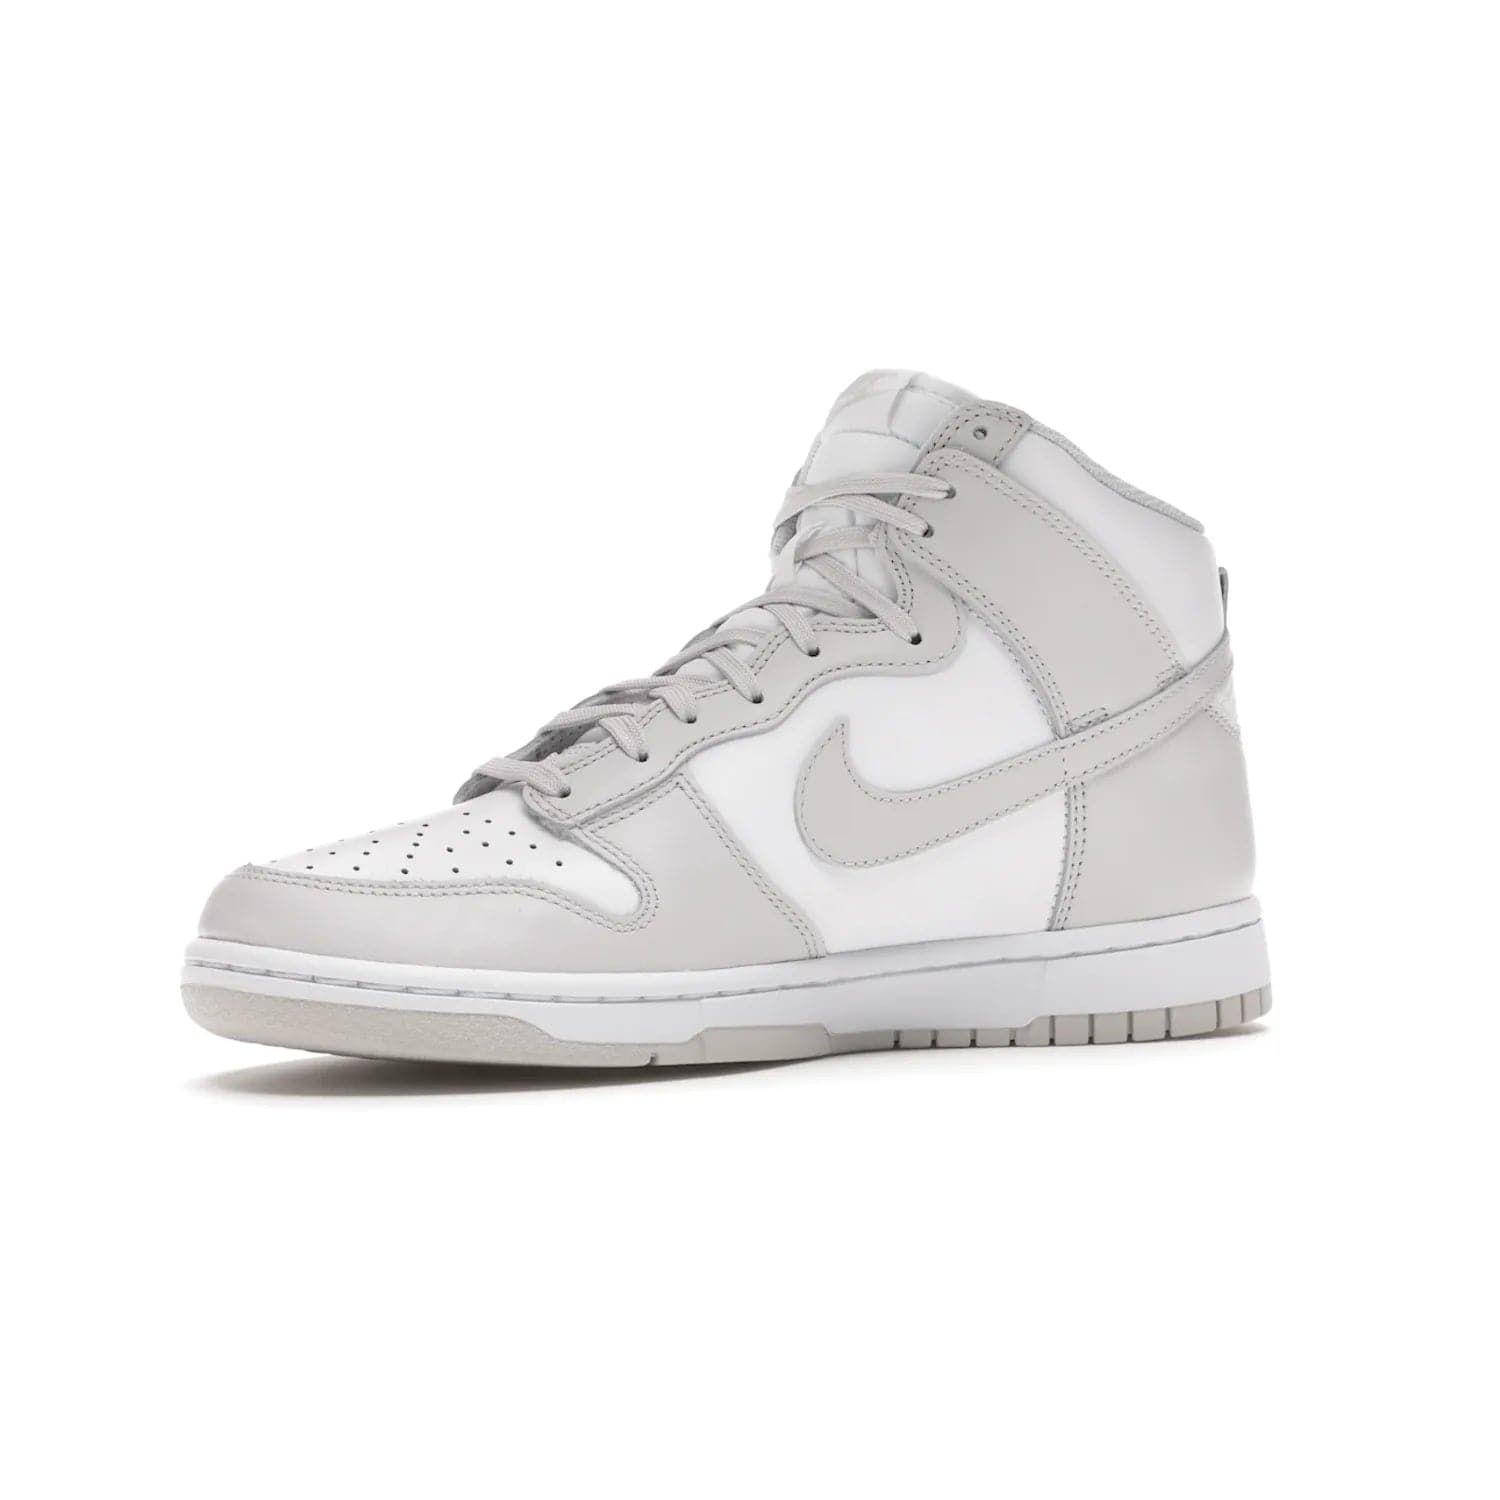 Nike Dunk High Retro White Vast Grey (2021) - Image 16 - Only at www.BallersClubKickz.com - Nike Dunk High Retro White Vast Grey 2021: classic '80s basketball sneaker with a crisp white base, grey overlays, midsole tooling and outsole. Dropped Feb. 2021.